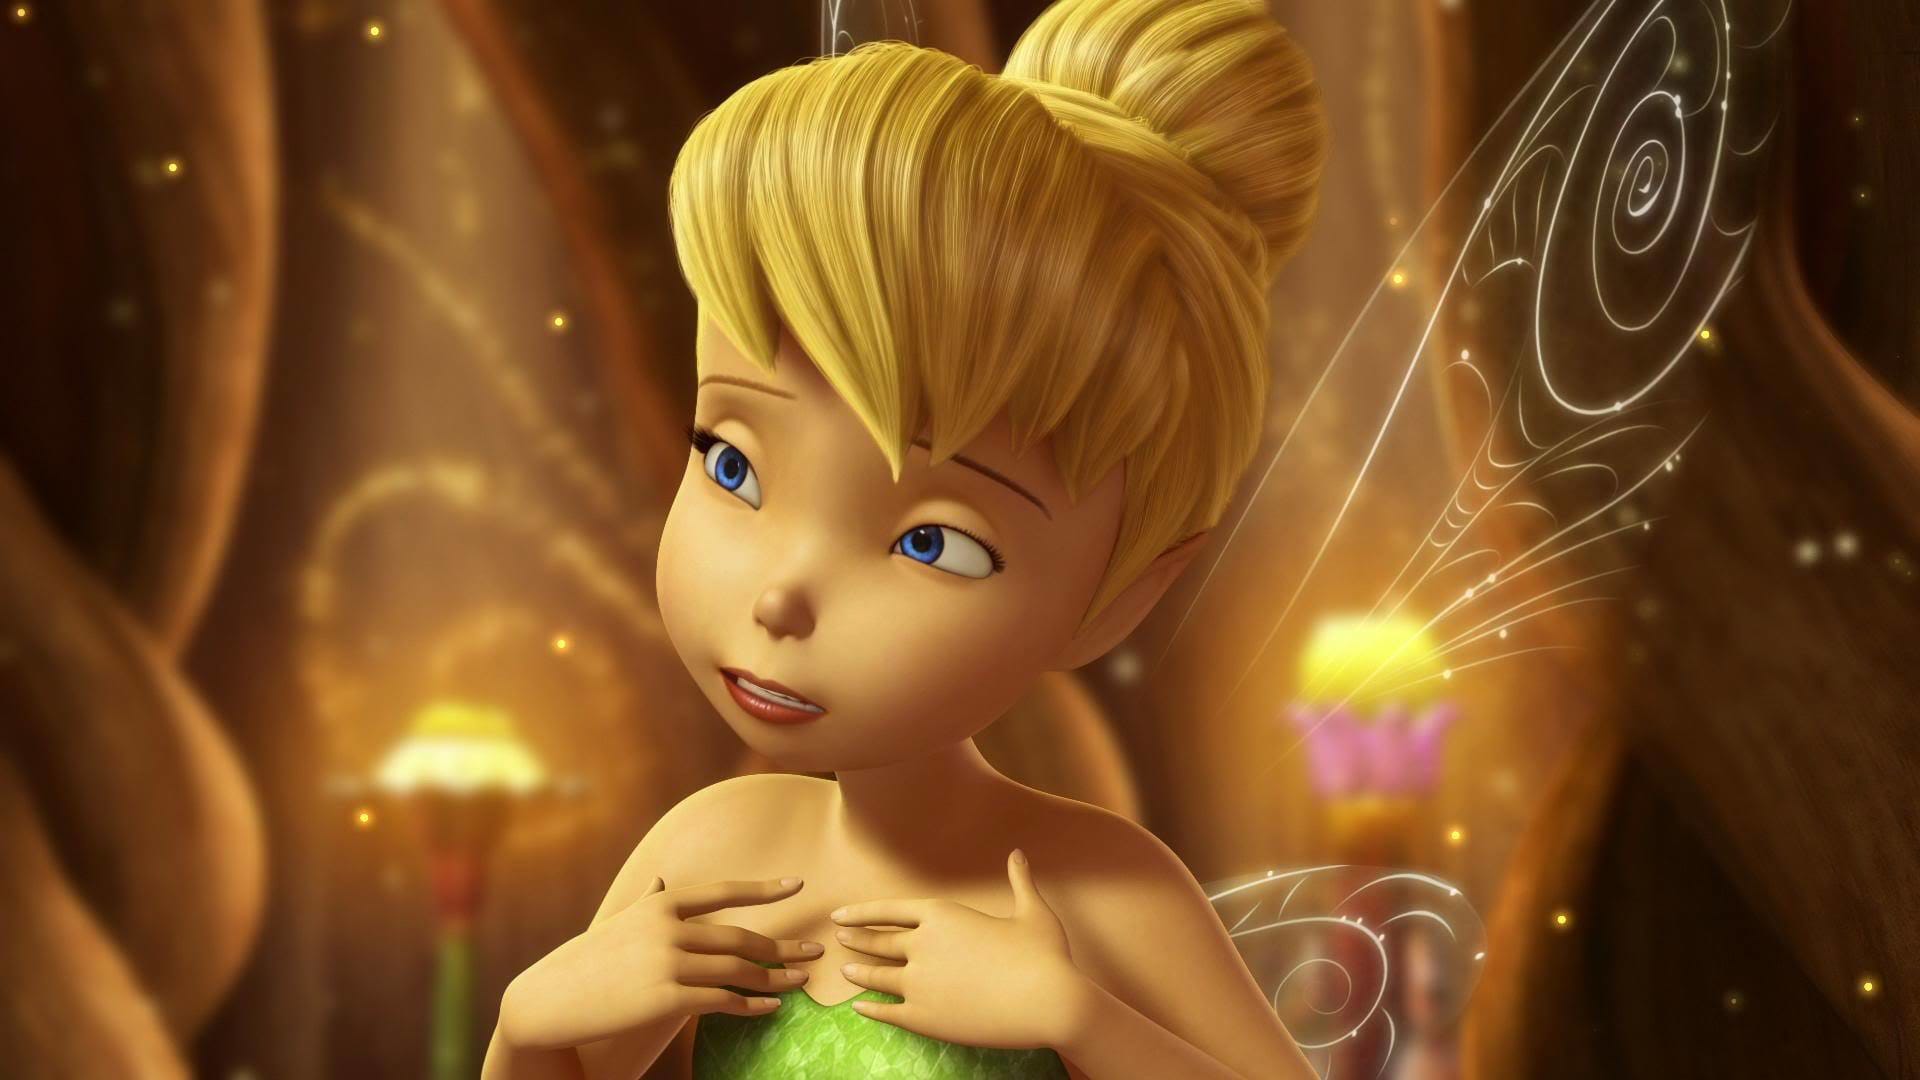 Tinker Bell And The Lost Treasure wallpapers.